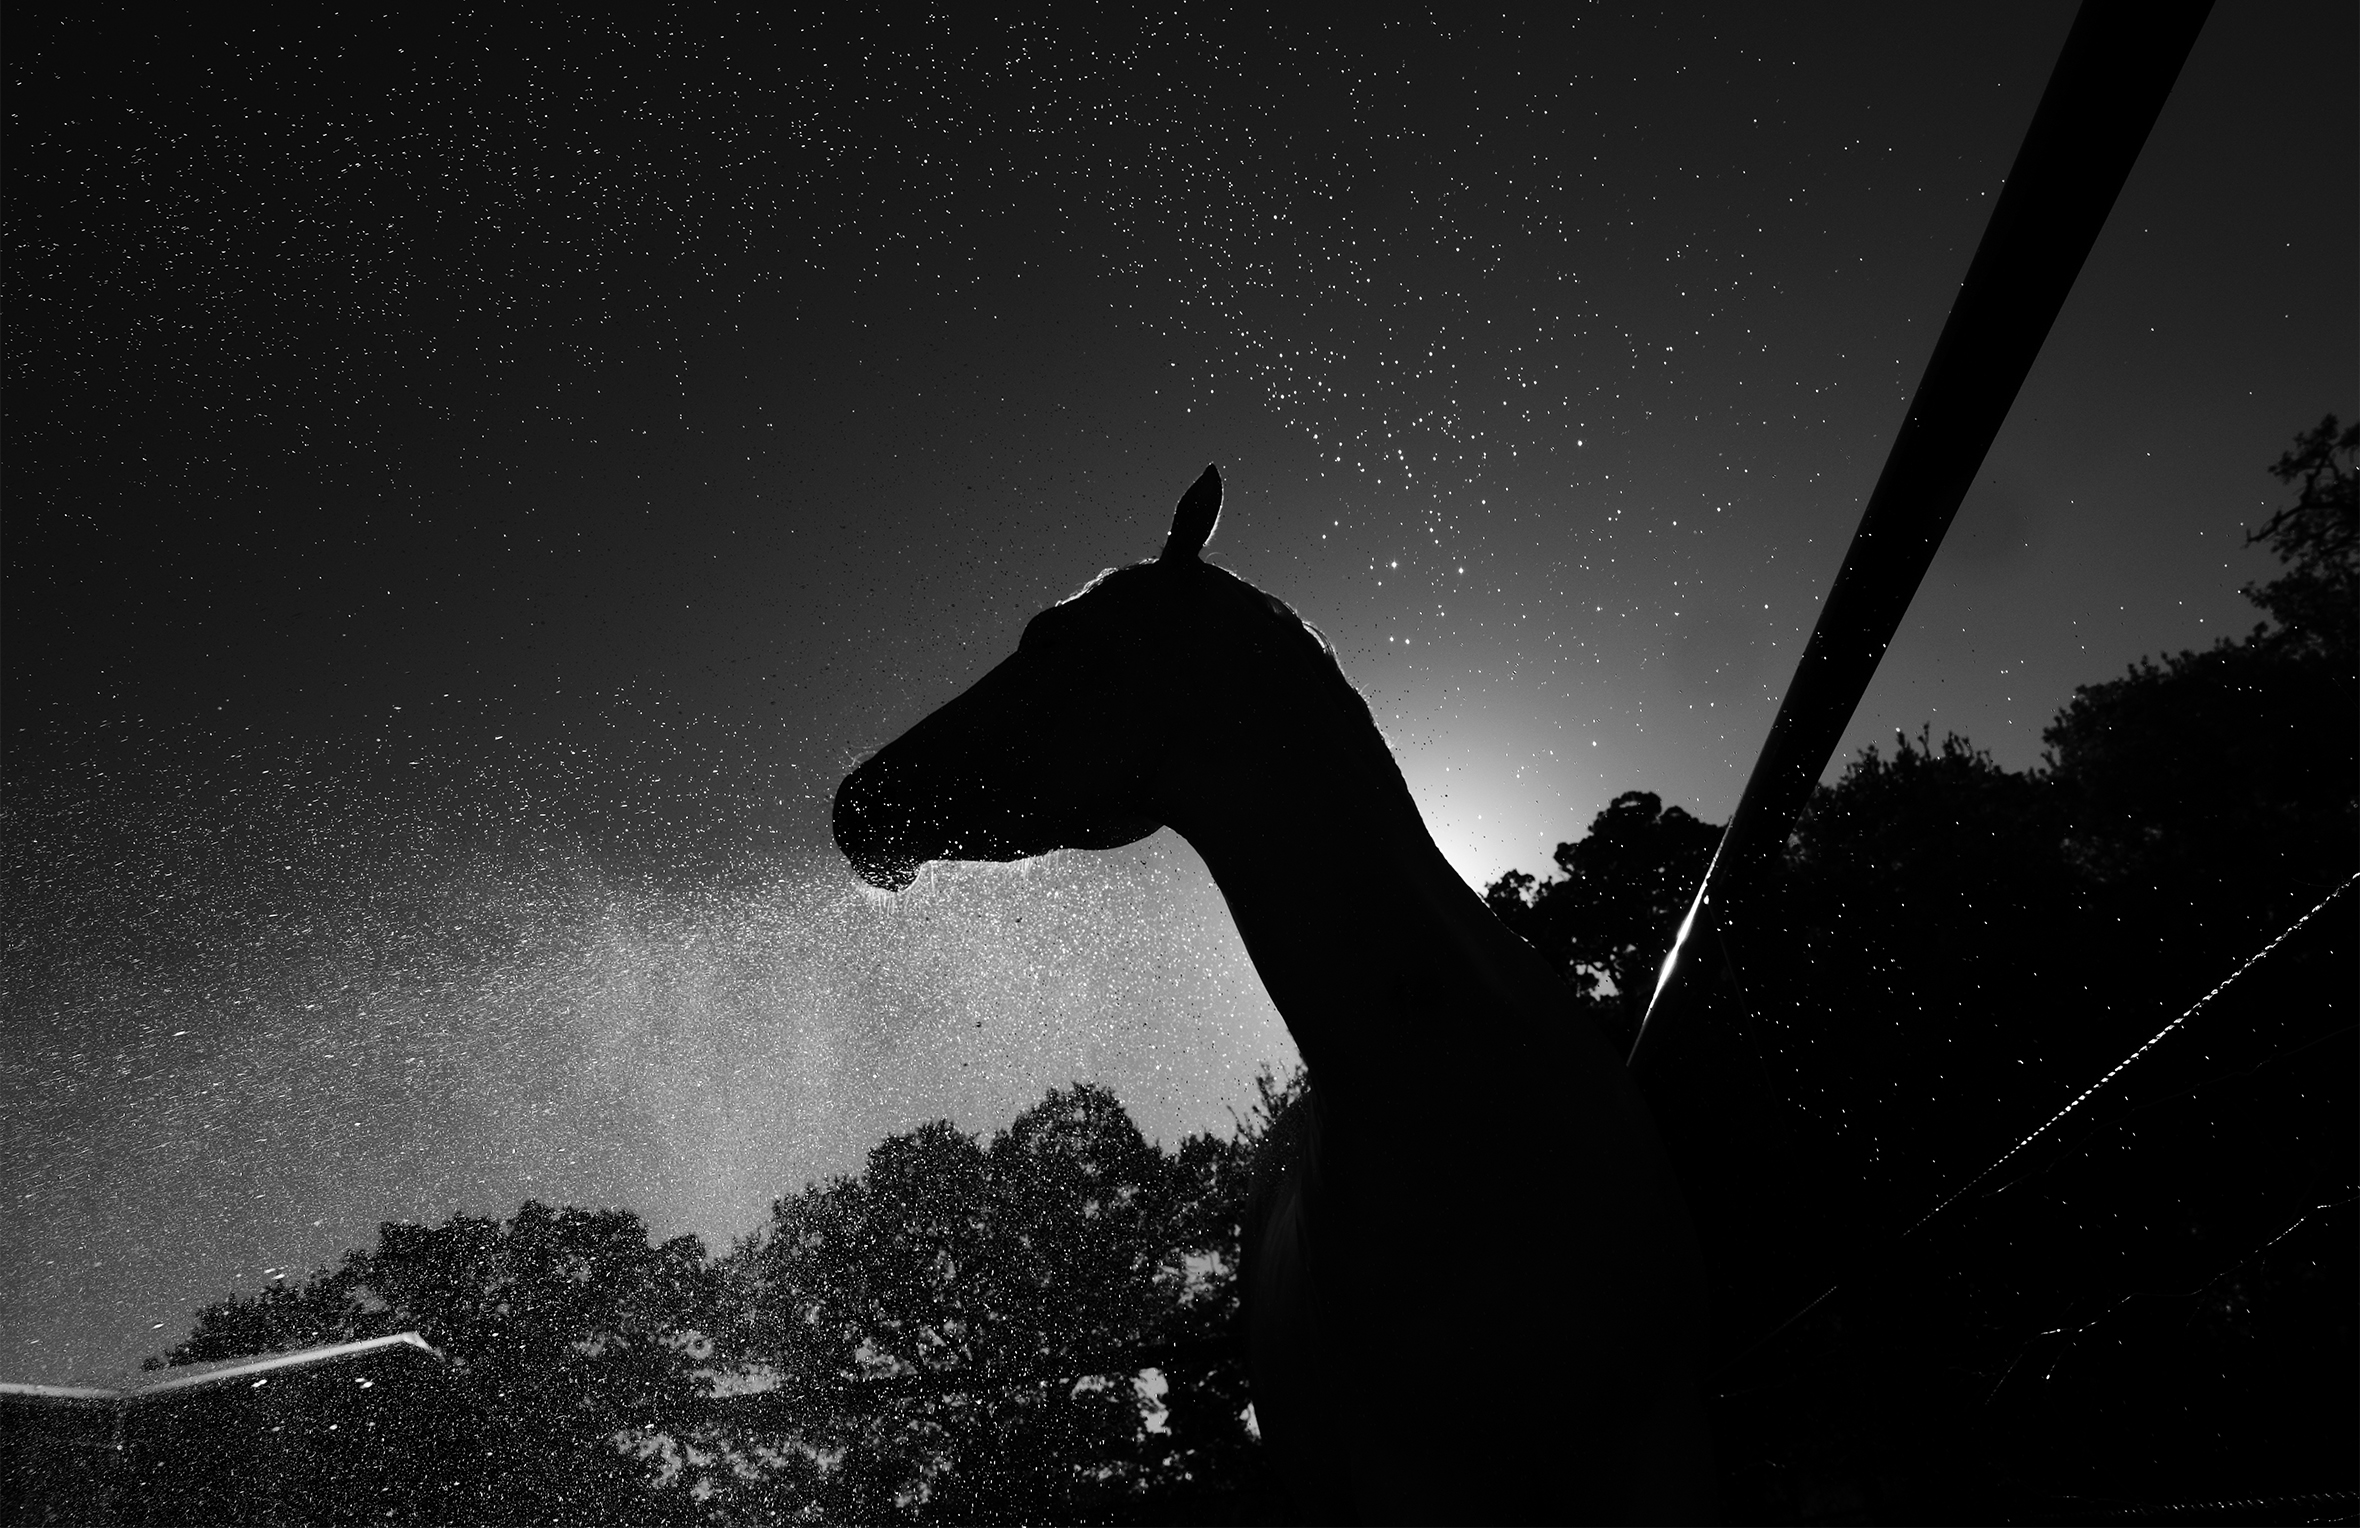 A horse in silhouette against the early evening dark in rural Texas with trees in the background. The dim light captures the horse’s breath and the water droplets he shakes off after his bath.